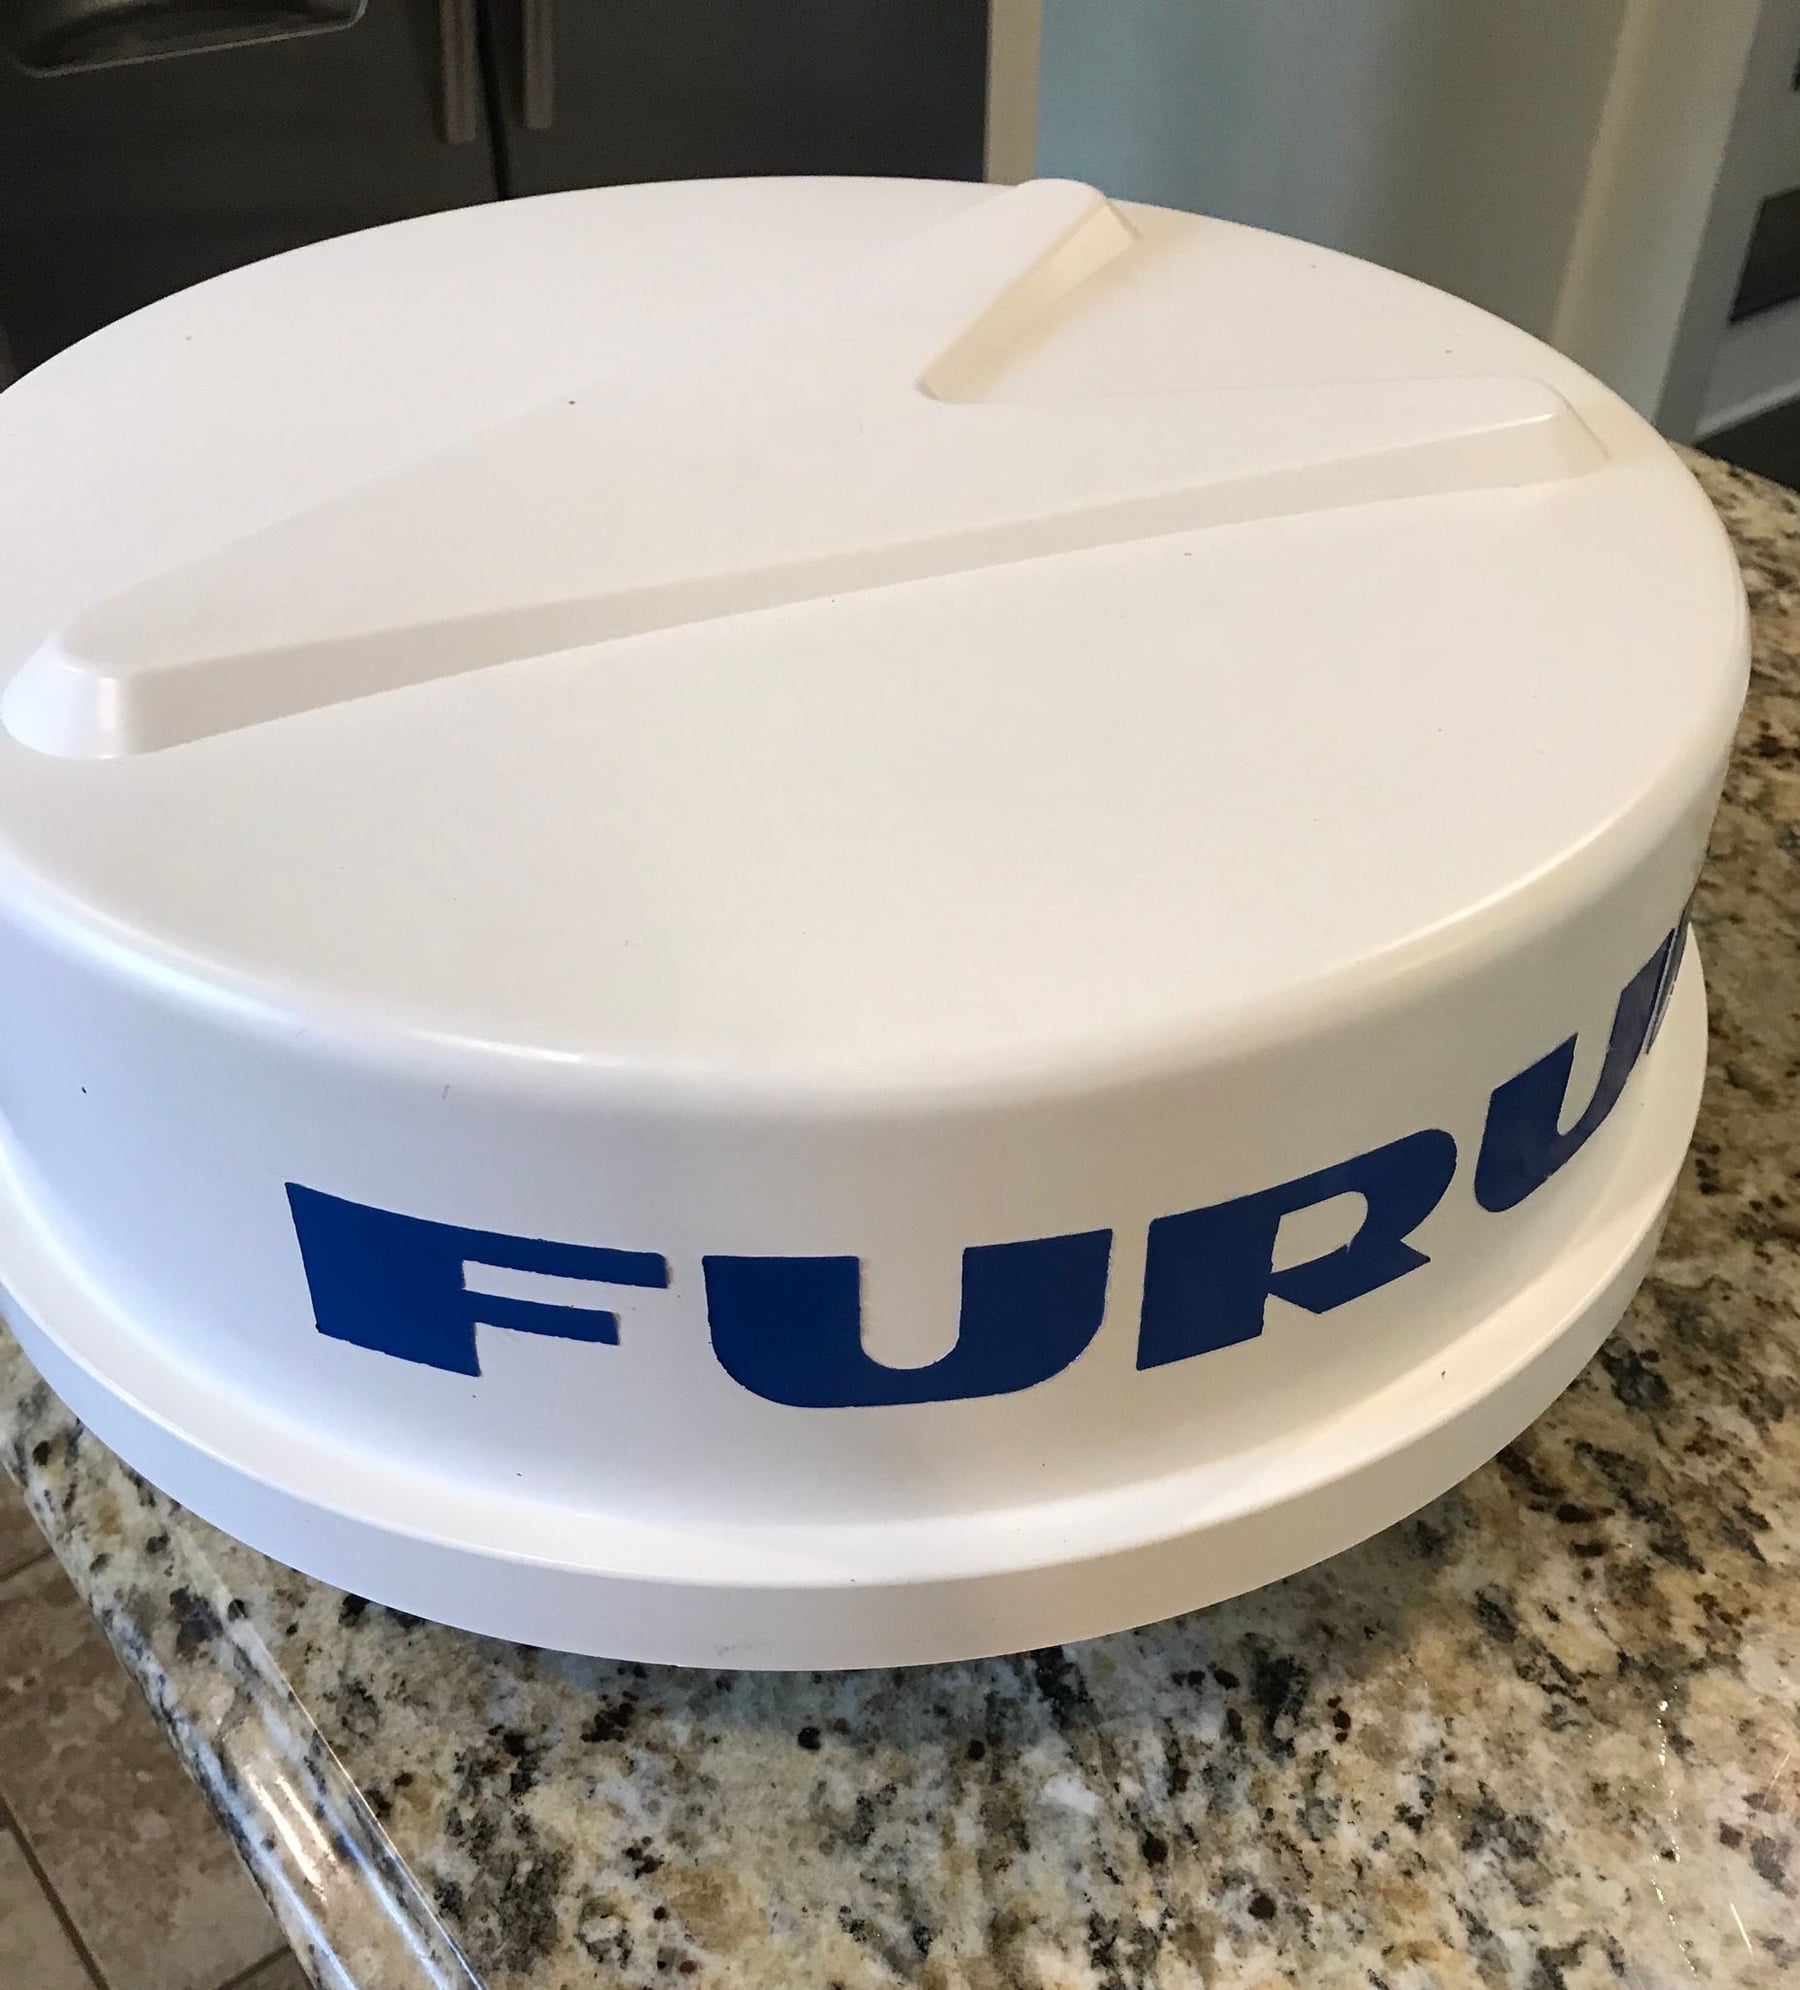 Furuno radar display and dome - The Hull Truth - Boating and Fishing Forum